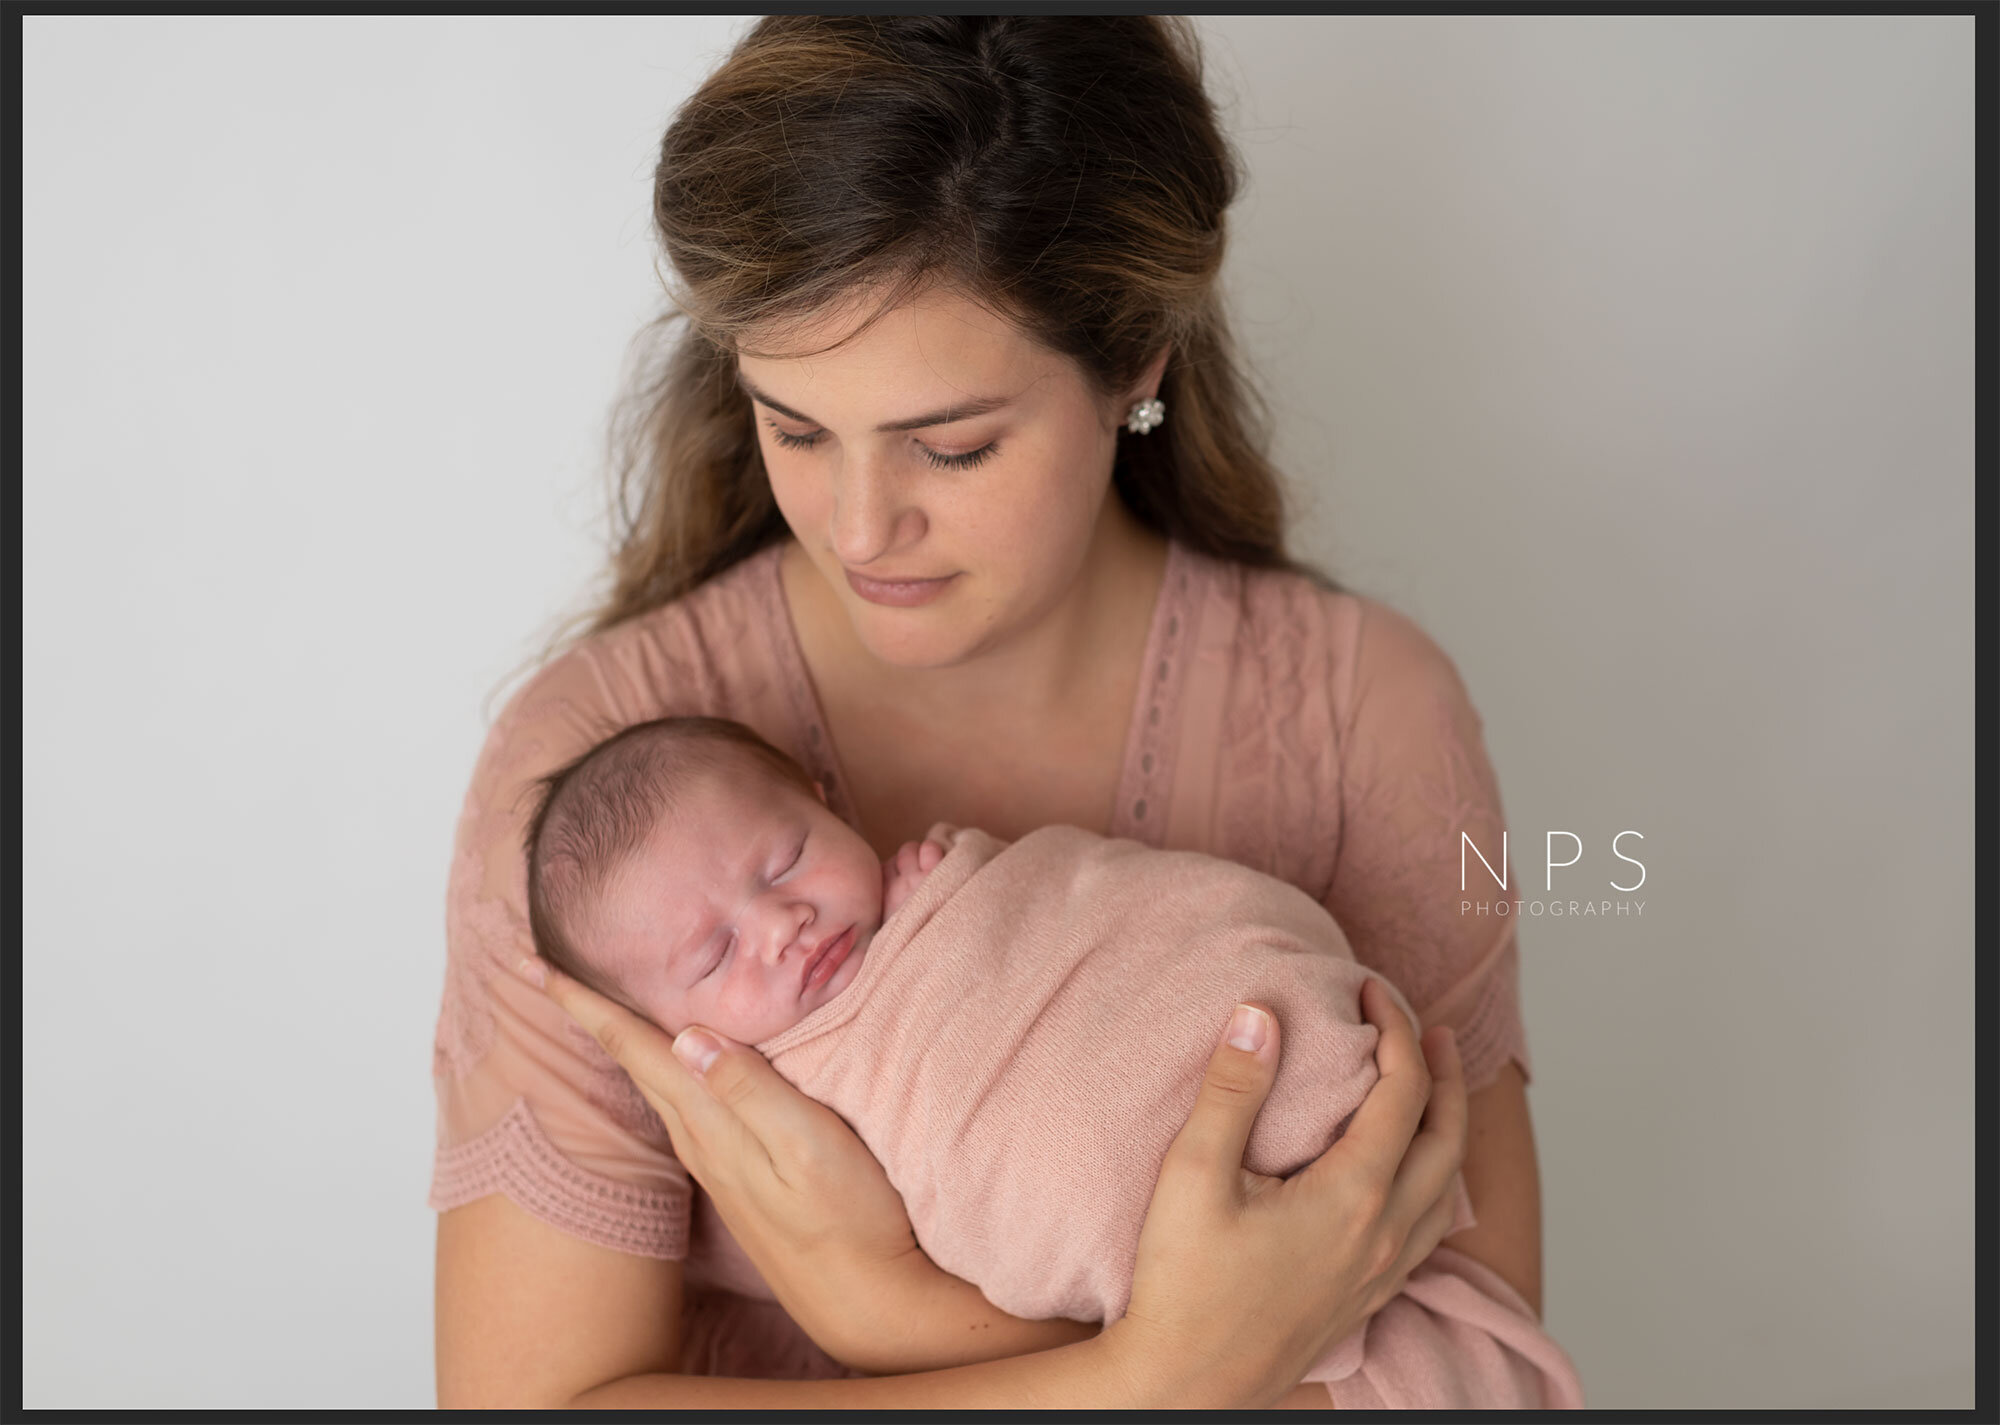 Before Newborn Photography - NPS Photography